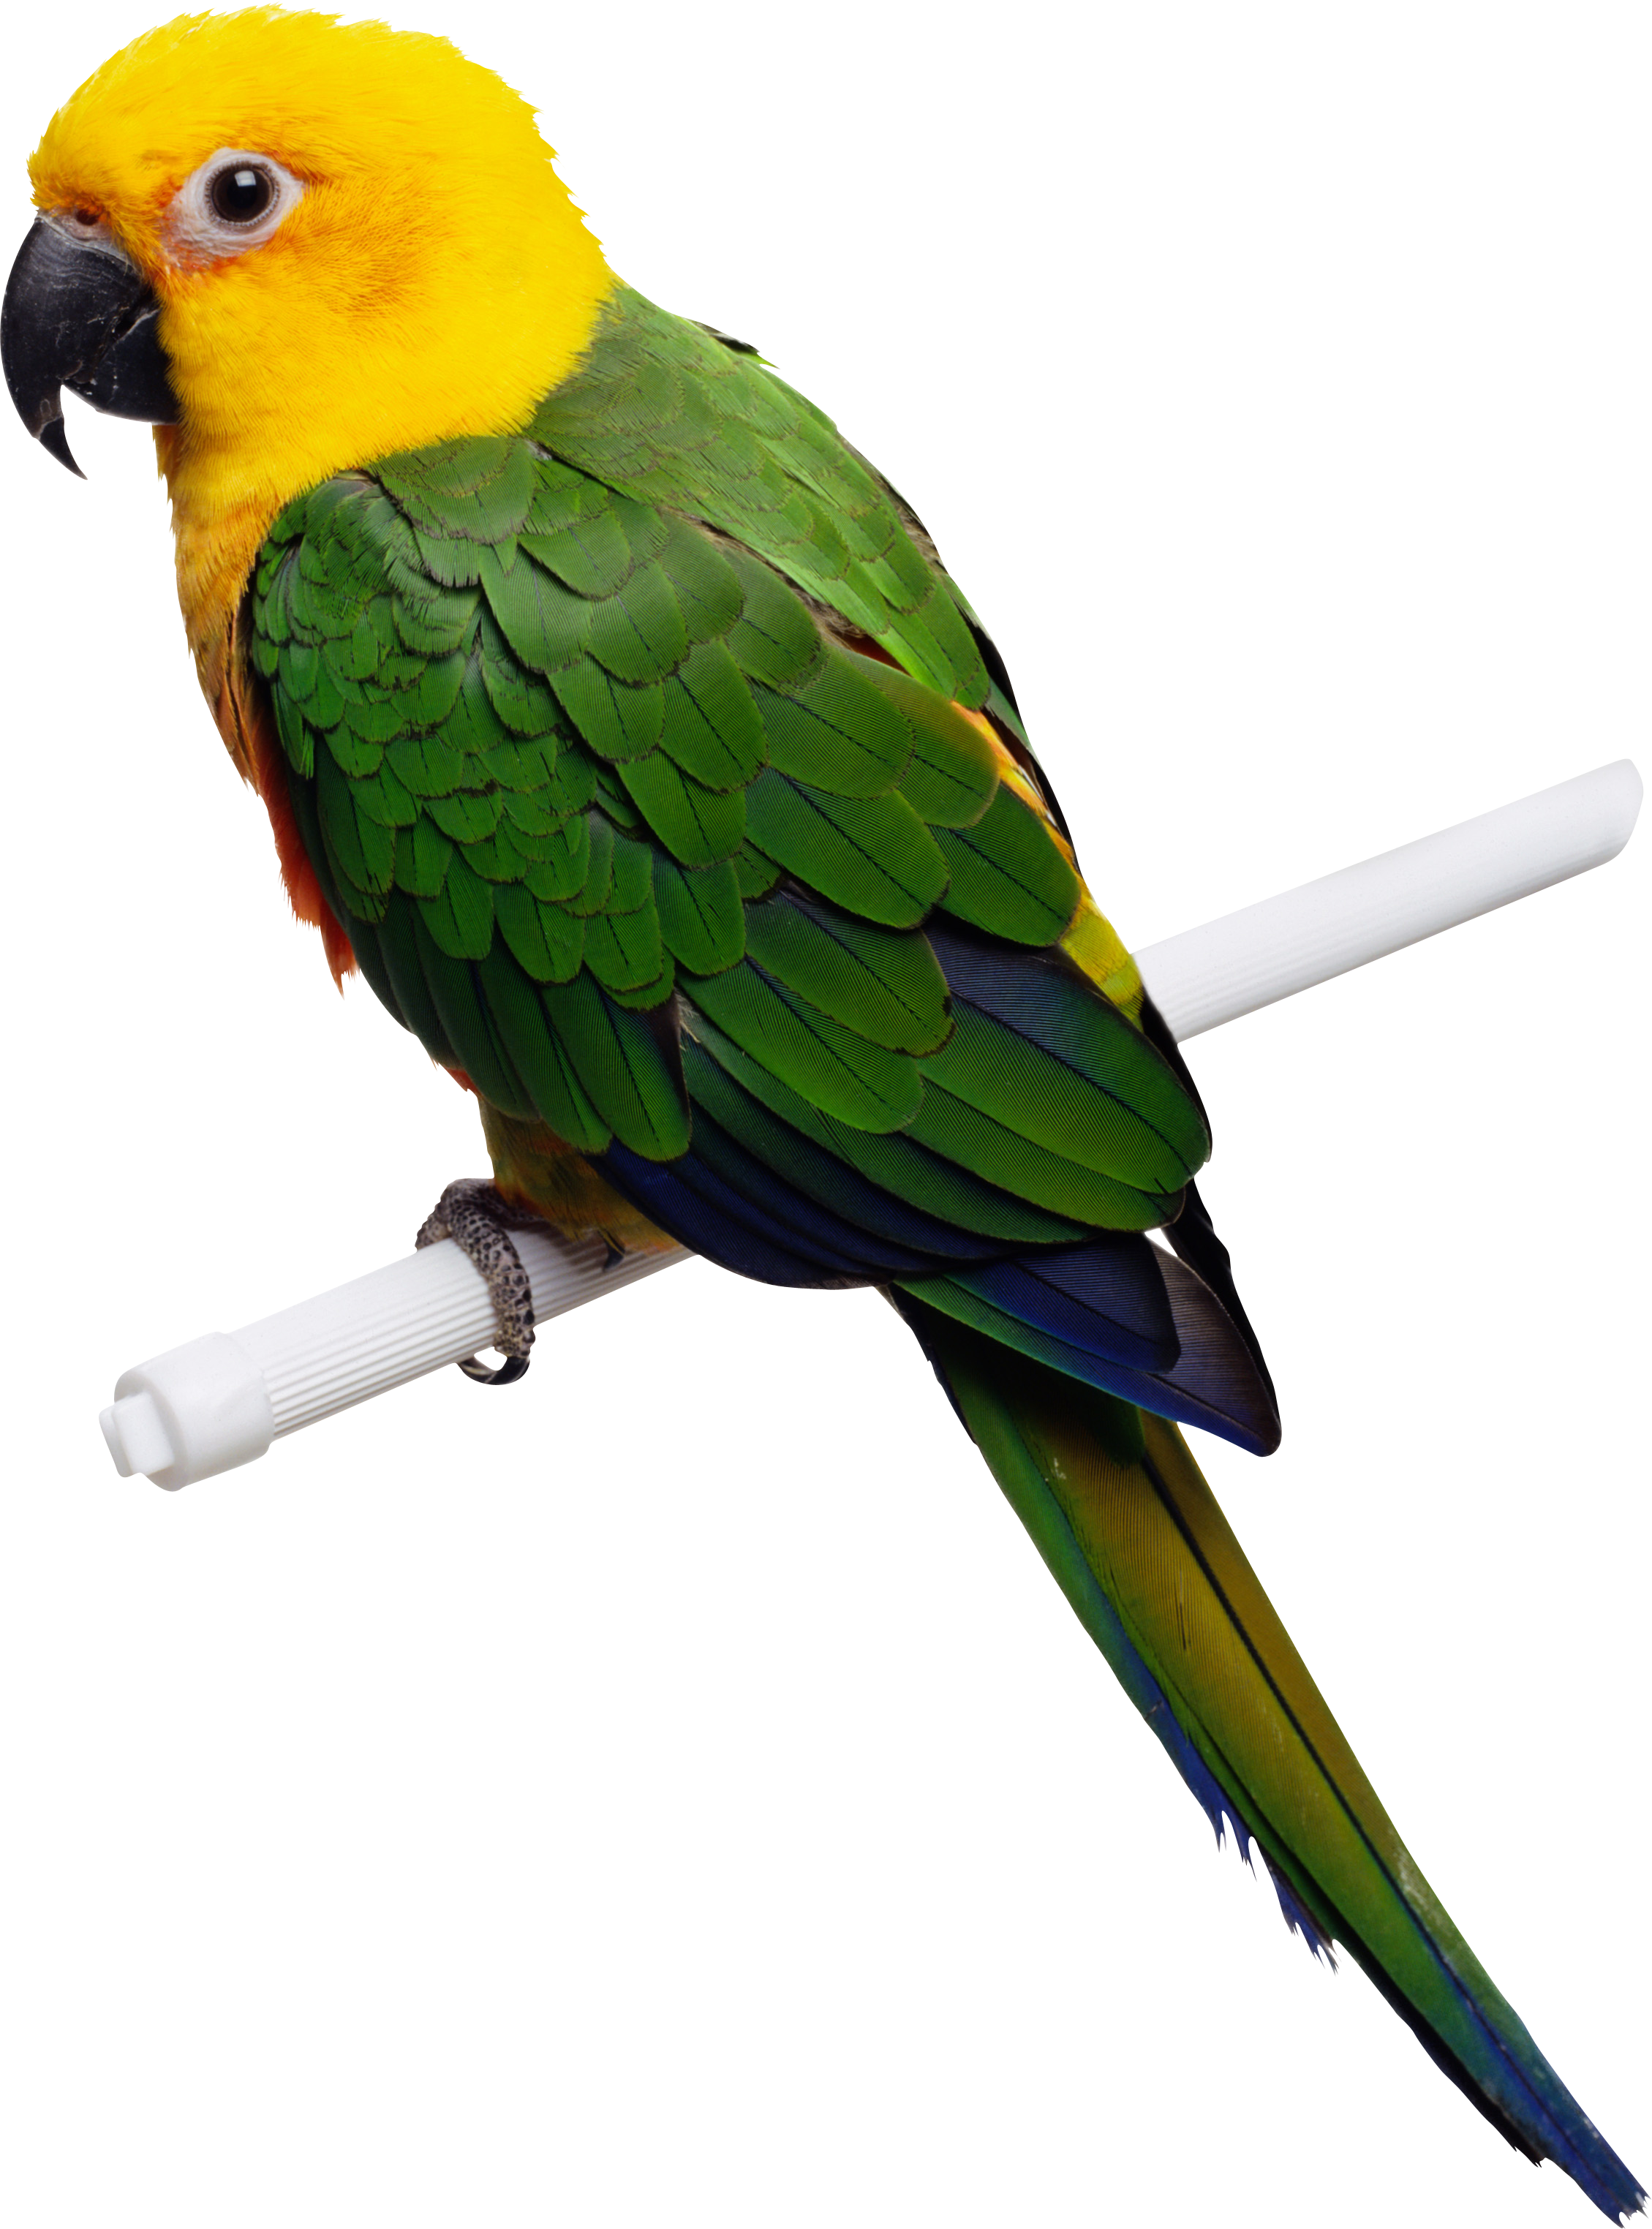 Green Yellow Parrot Png Images, Free Download - Download, Transparent background PNG HD thumbnail